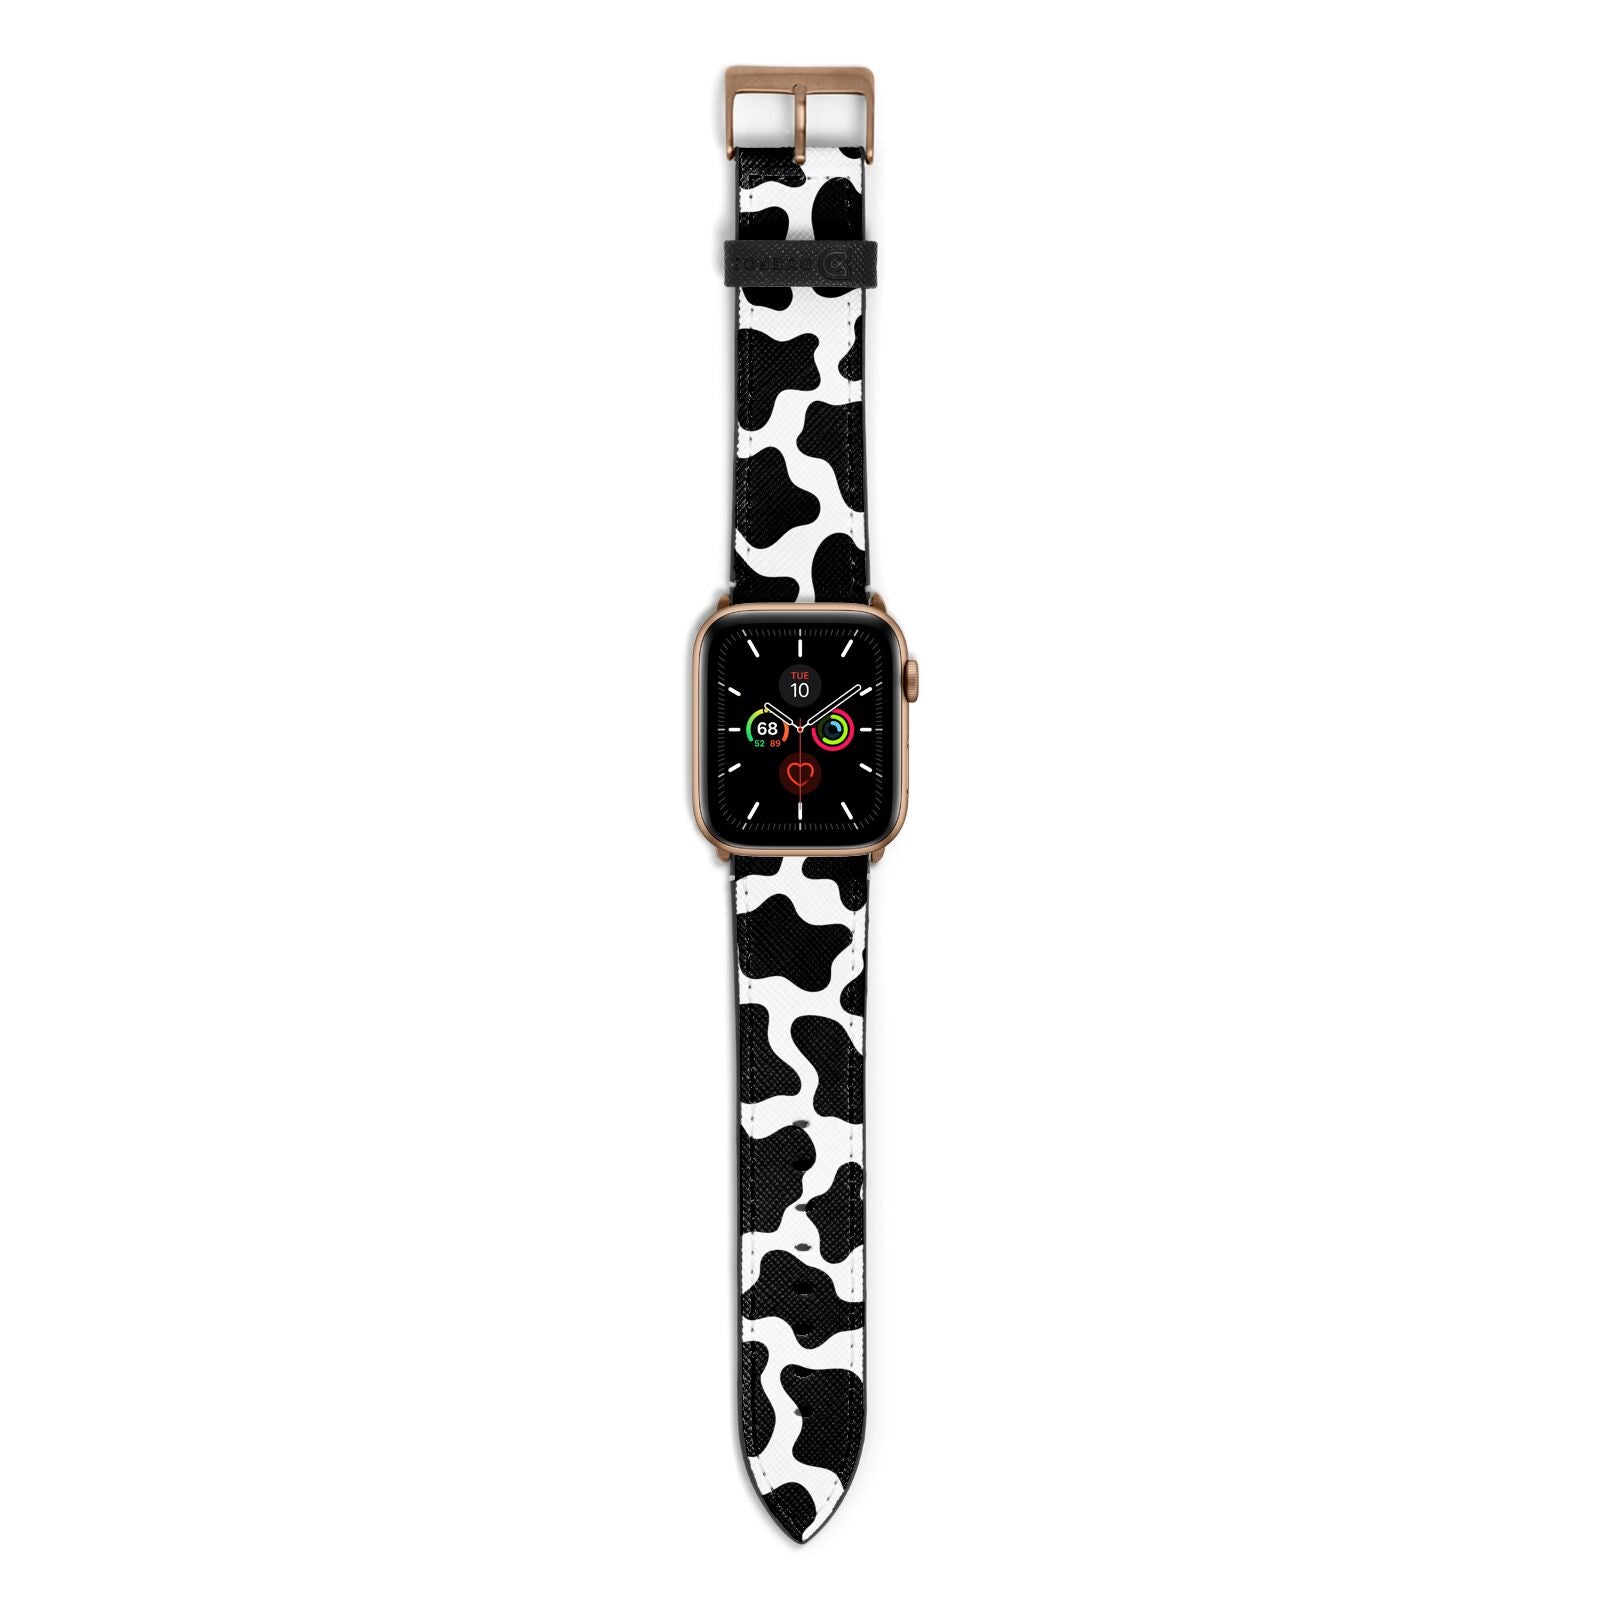 Cow Print Apple Watch Strap with Gold Hardware